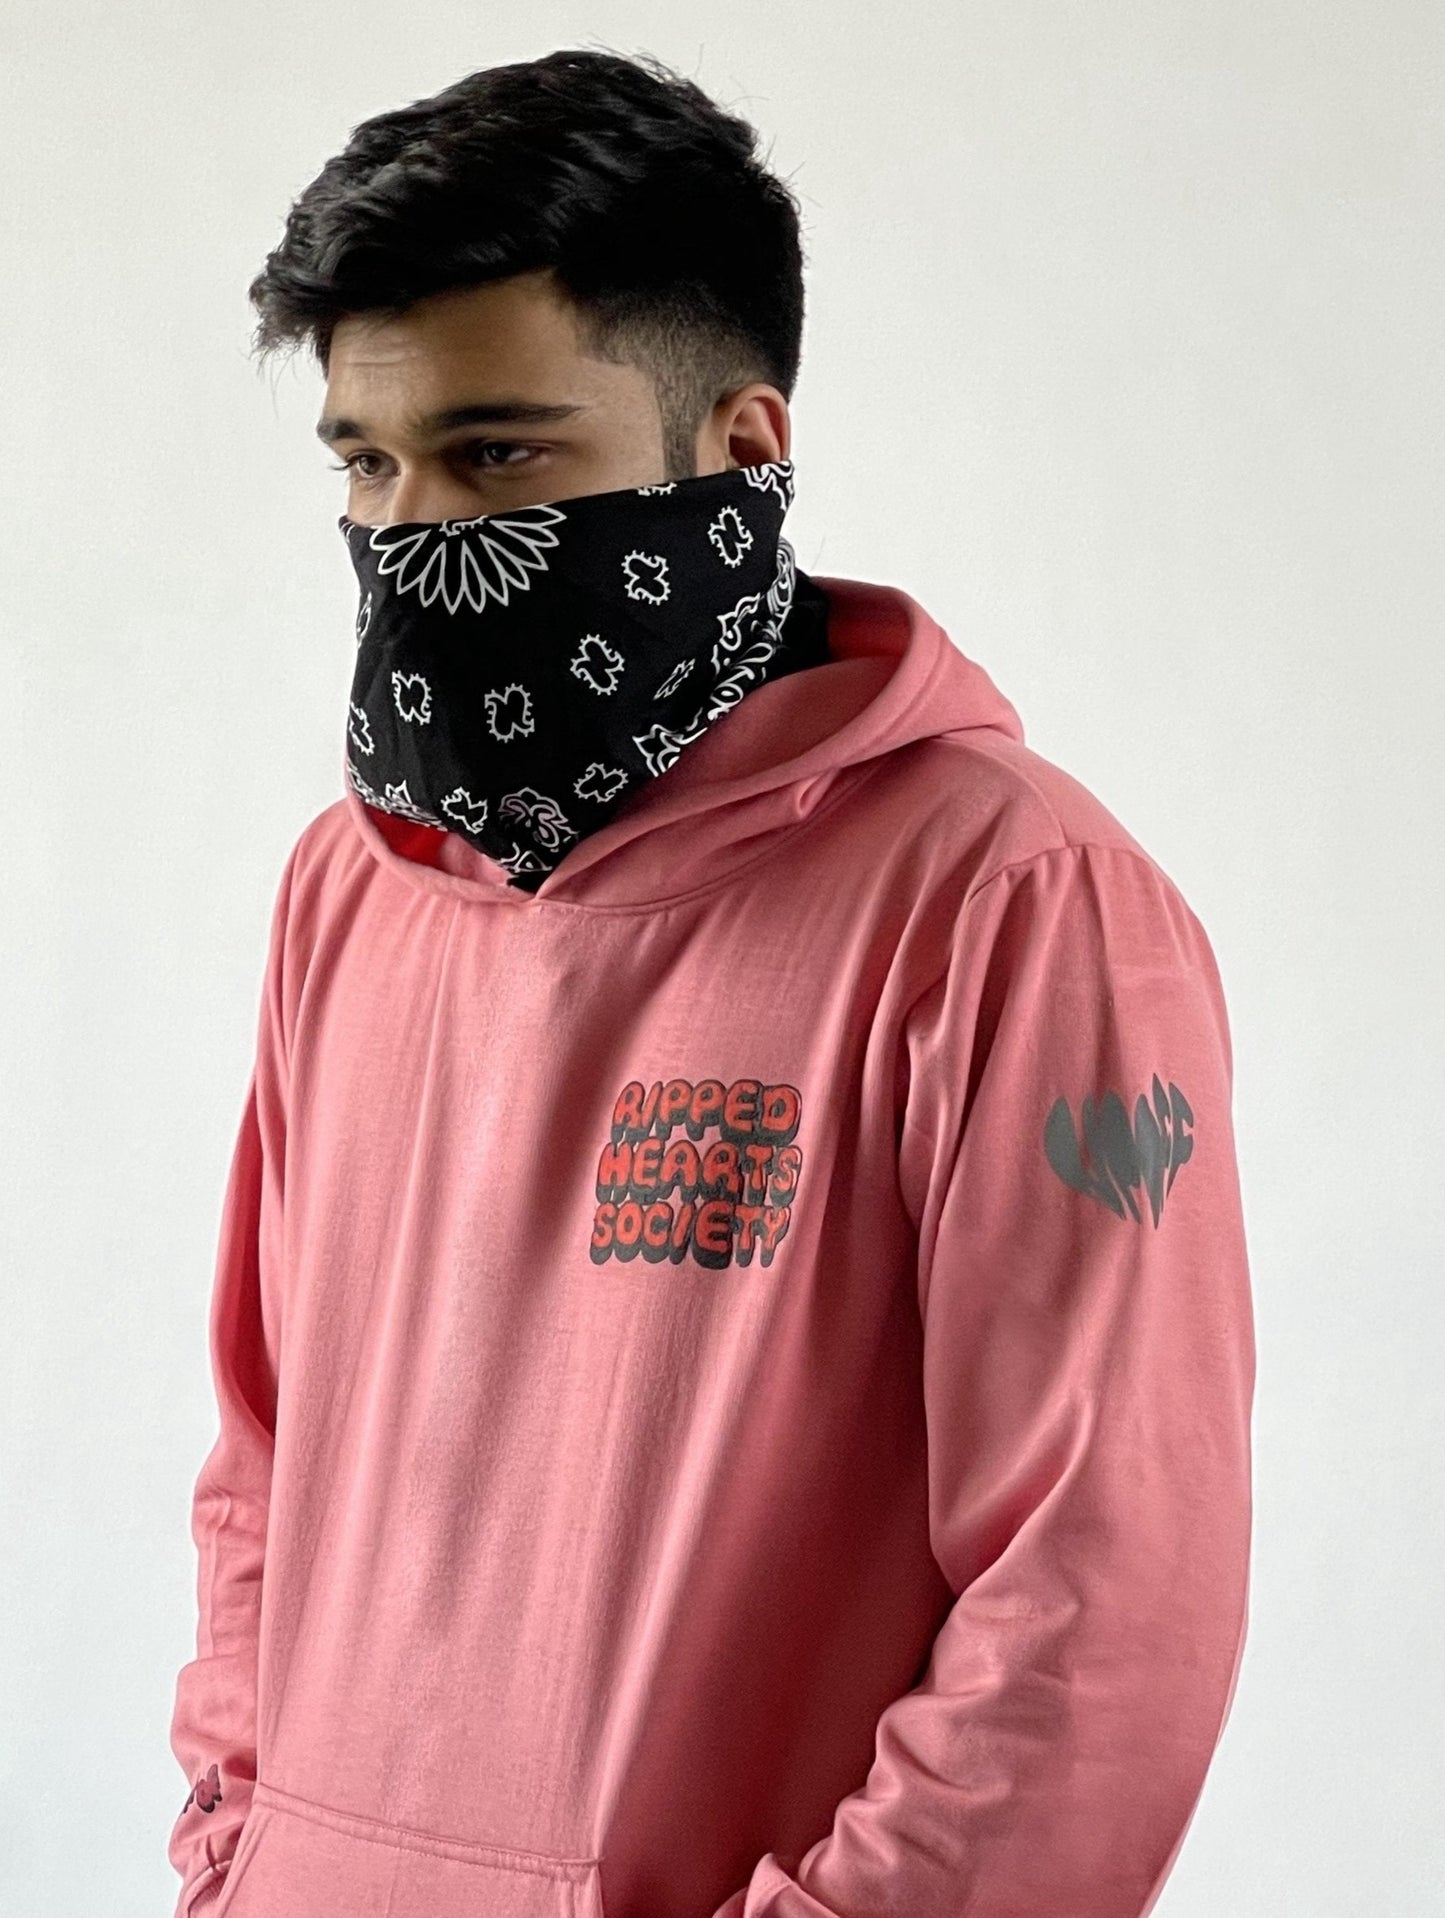 Ripped hearts Hoodie (Outerwear) by Ripoff